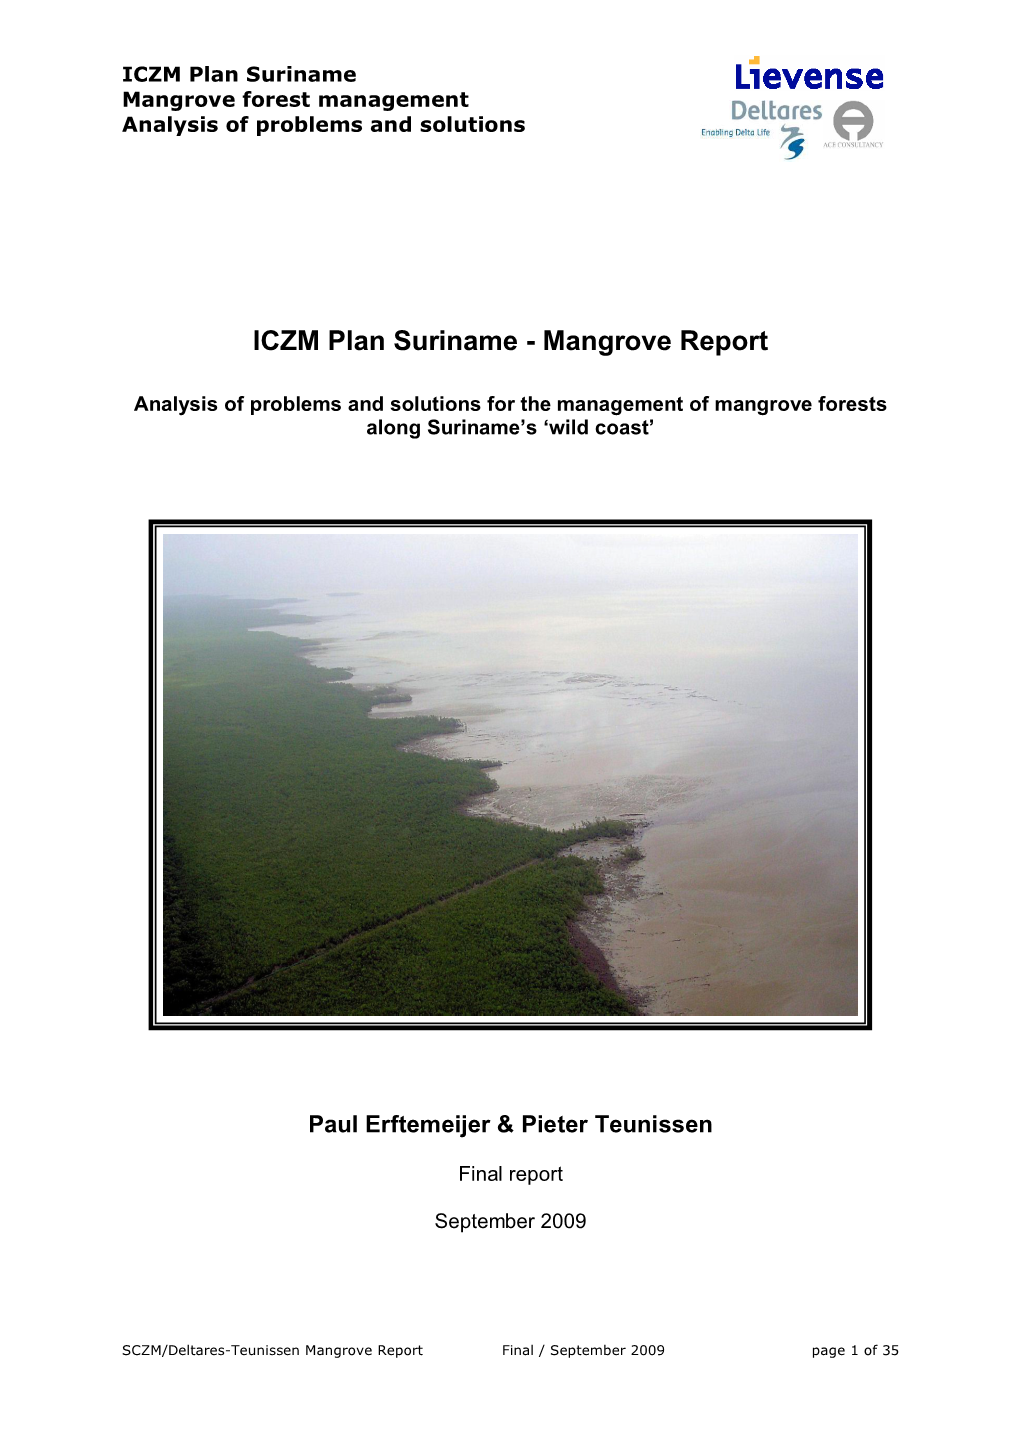 ICZM Plan Suriname Mangrove Forest Management Analysis of Problems and Solutions